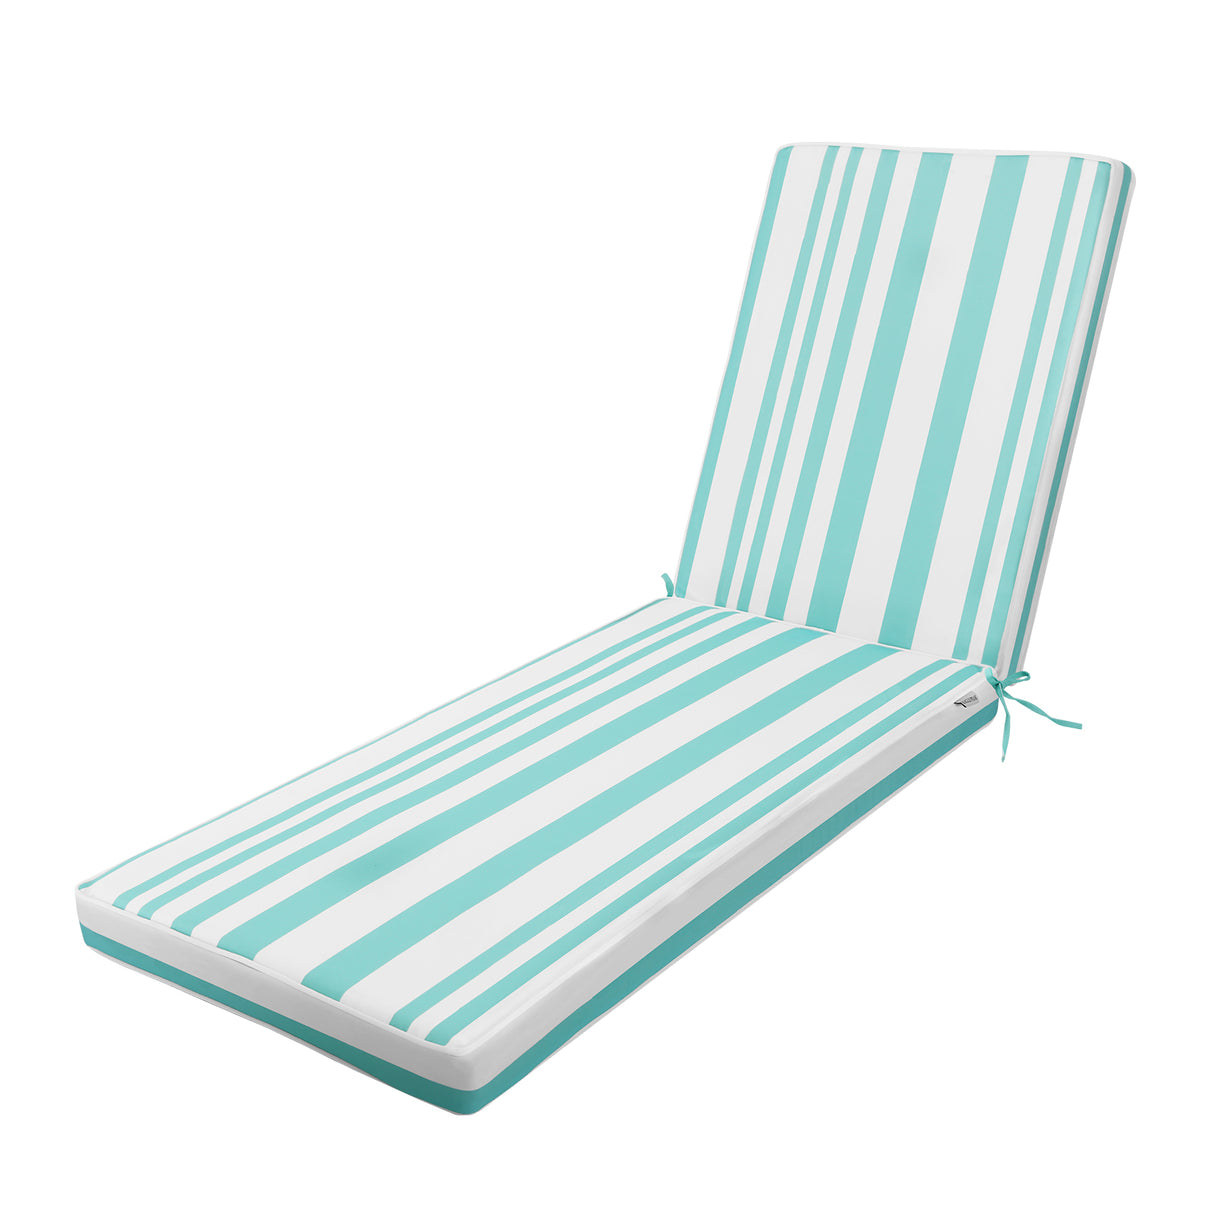 EAGLE PEAK Outdoor / Indoor Chaise Lounge Cushion 72 x 21 x 3 Inch Water Resistant Patio Lounge Seat Cushions, Green Stripe / Beige